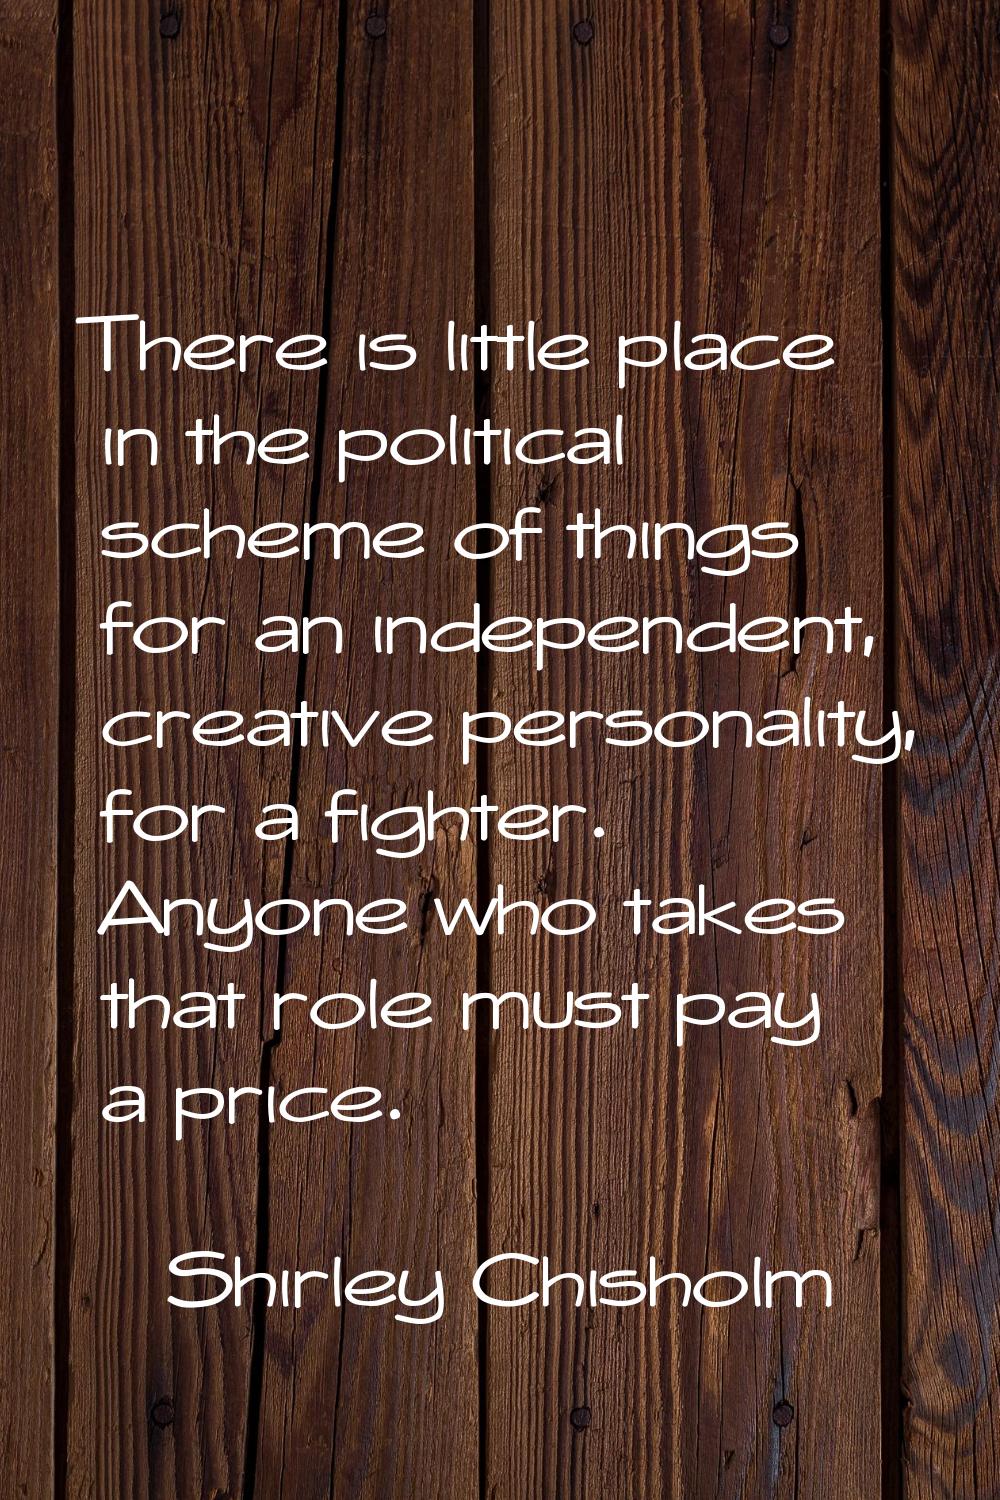 There is little place in the political scheme of things for an independent, creative personality, f